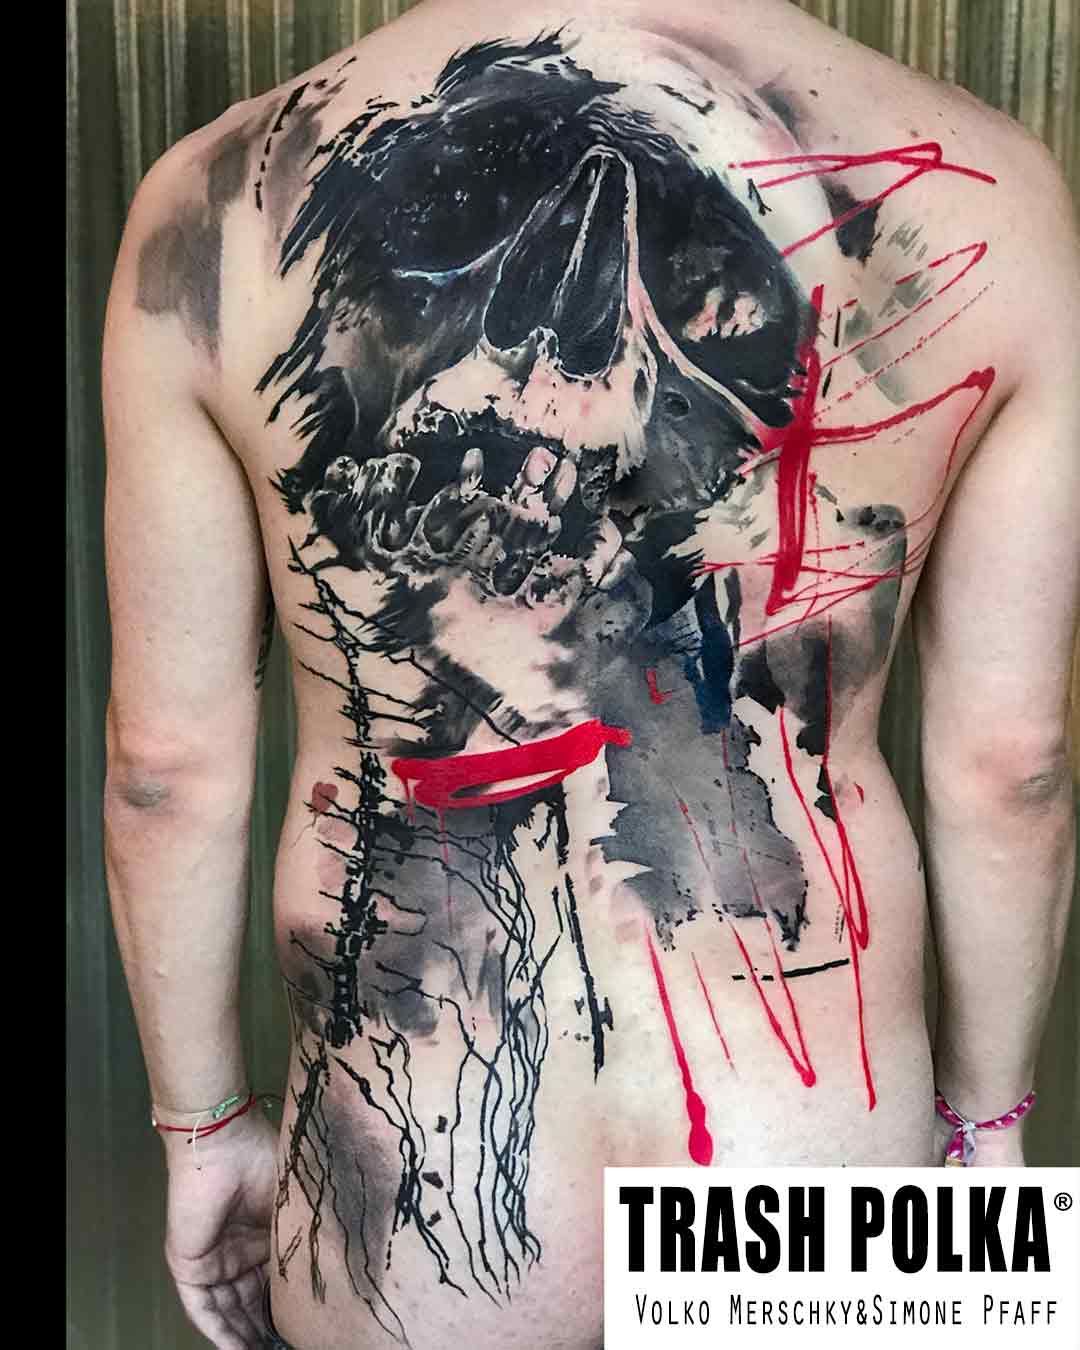 trash polka tattoo on a back red ink lines a big skull and graphic art